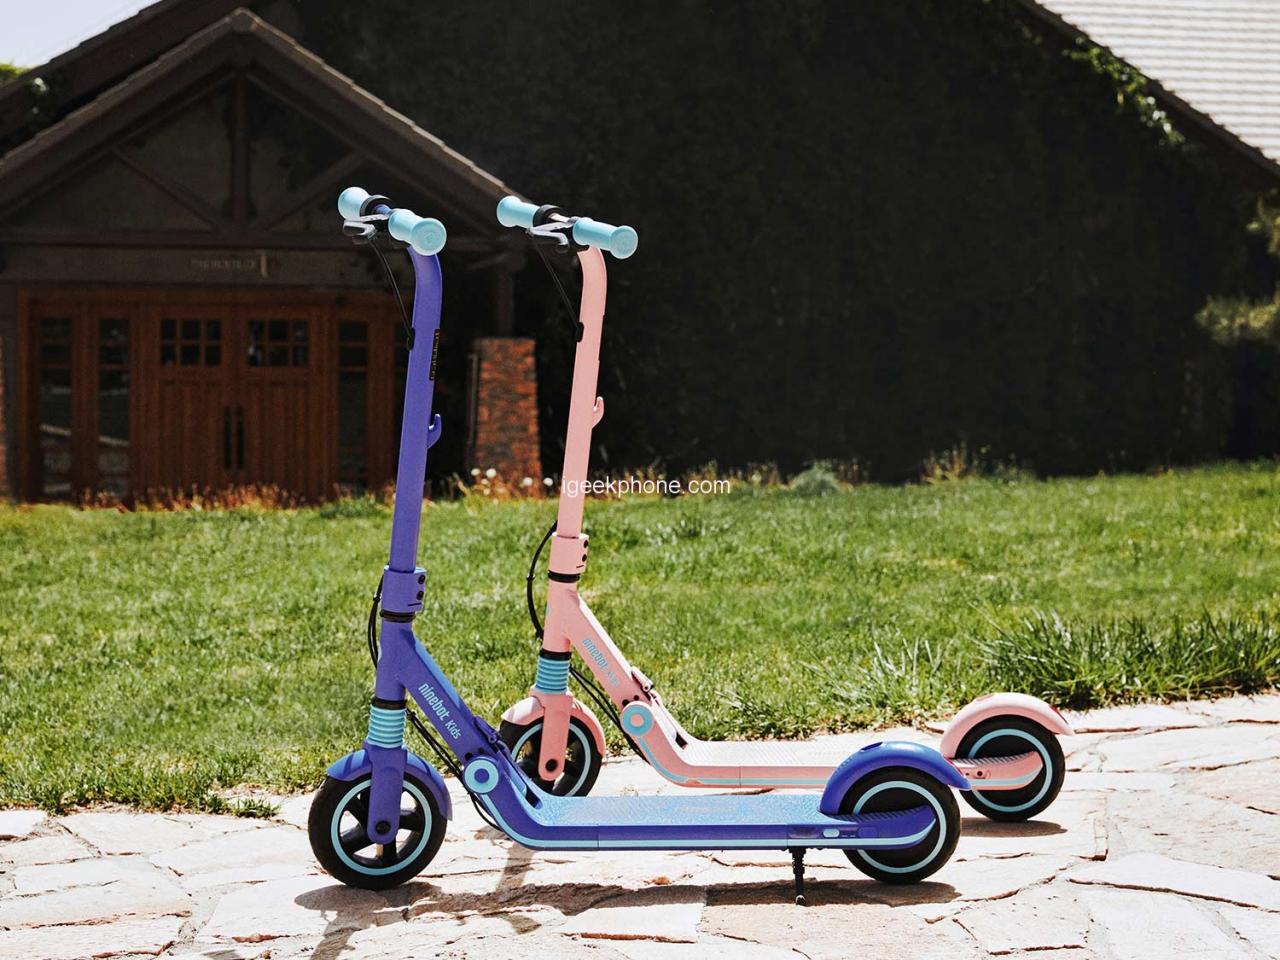 Ninebot Segway E8 Review - Folding Electric Scooter for Kids at 4.99